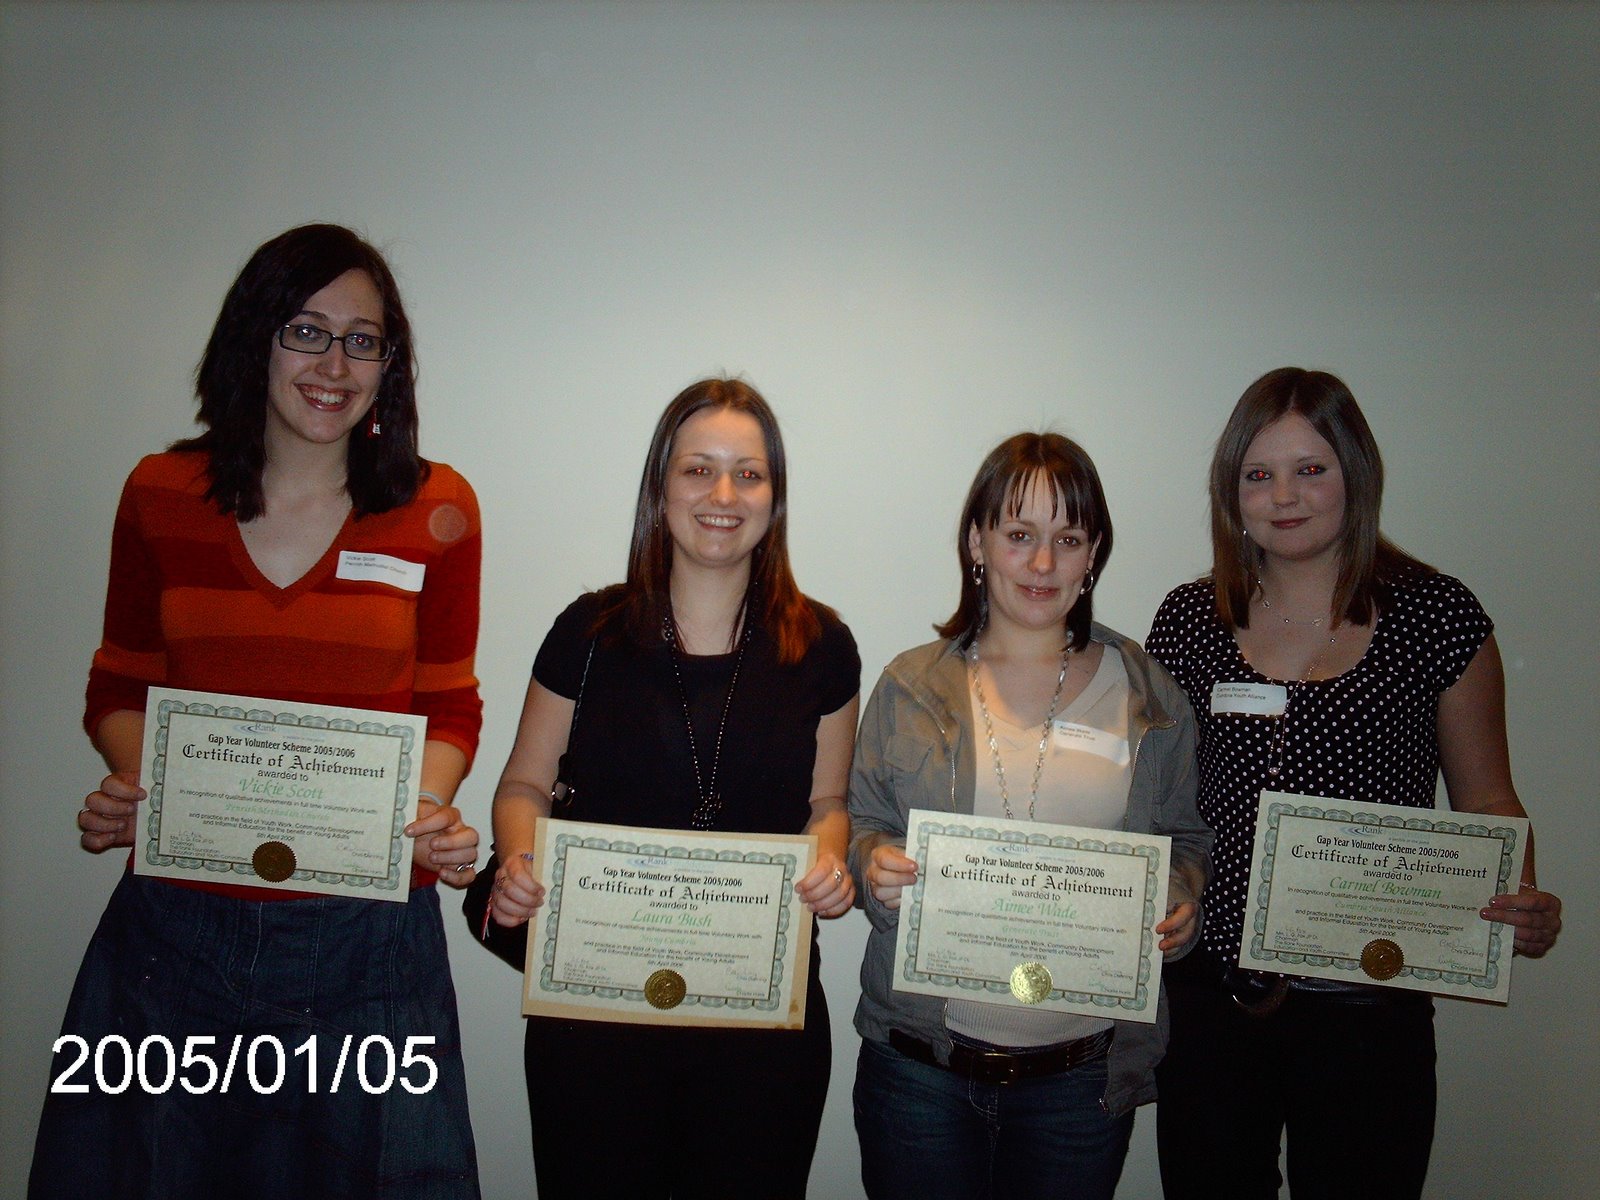 [Vickie,+Laura,+Aimee+and+Carmel+-+with+Certs.JPG]